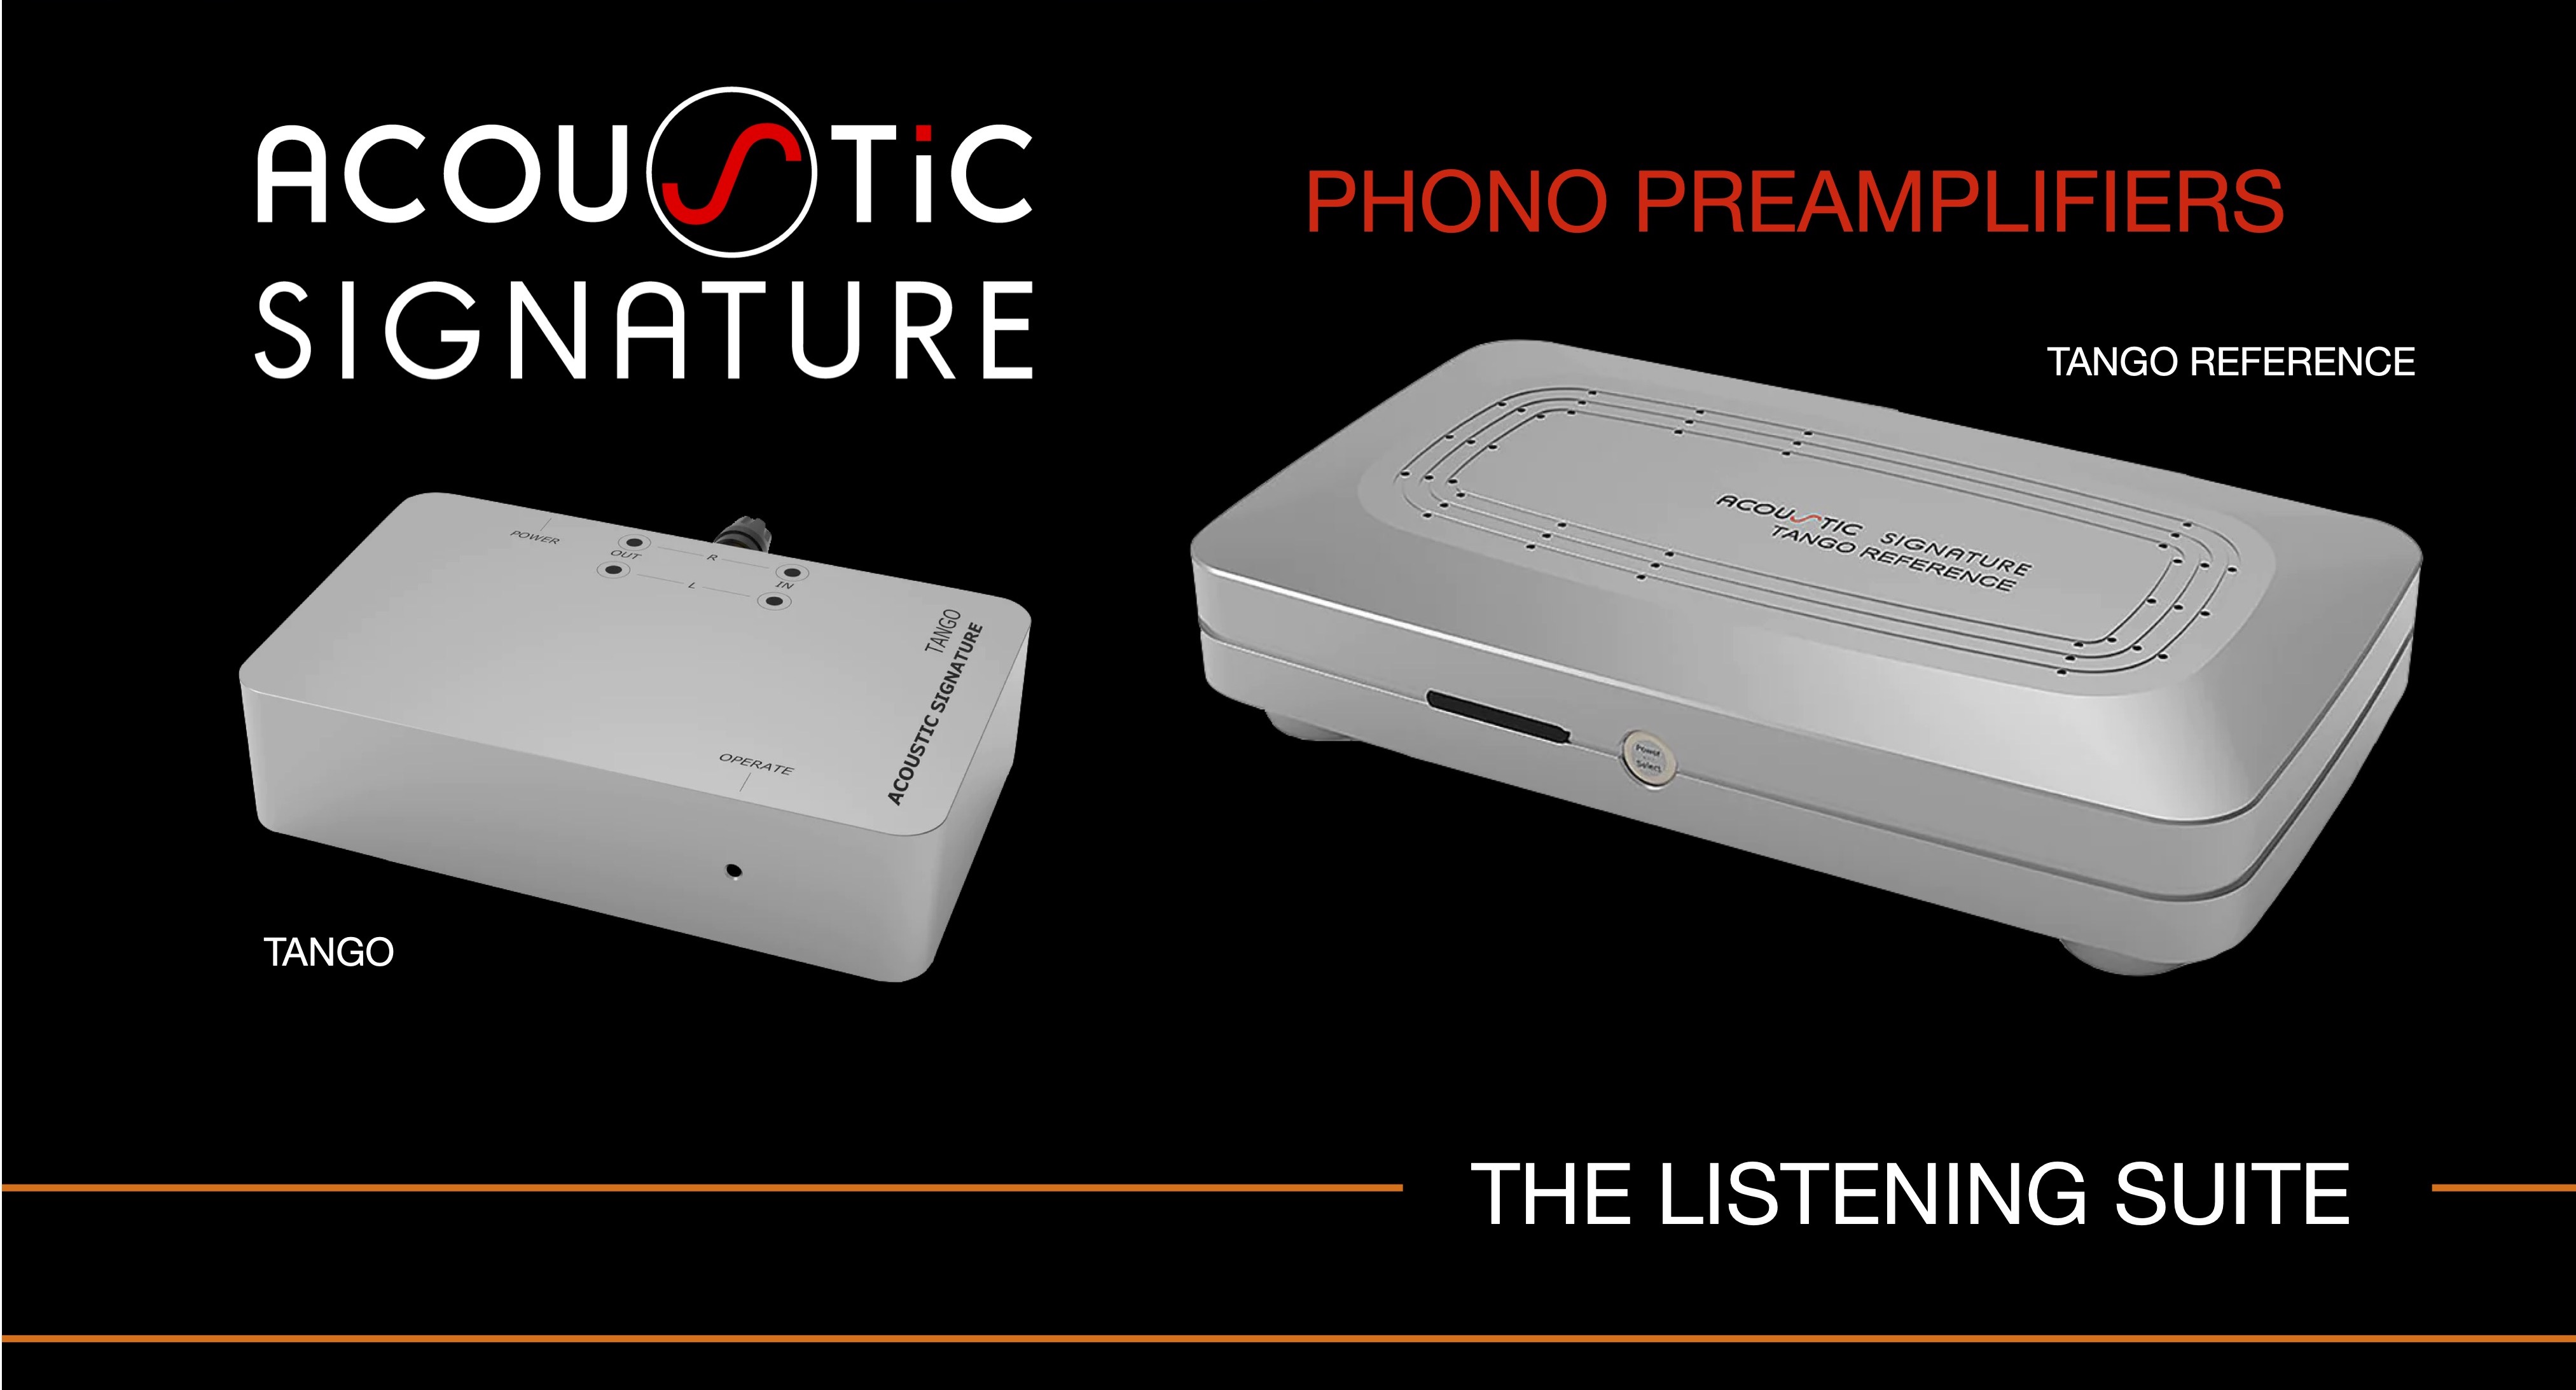 acoustic-signature-phono-preamps.jpg